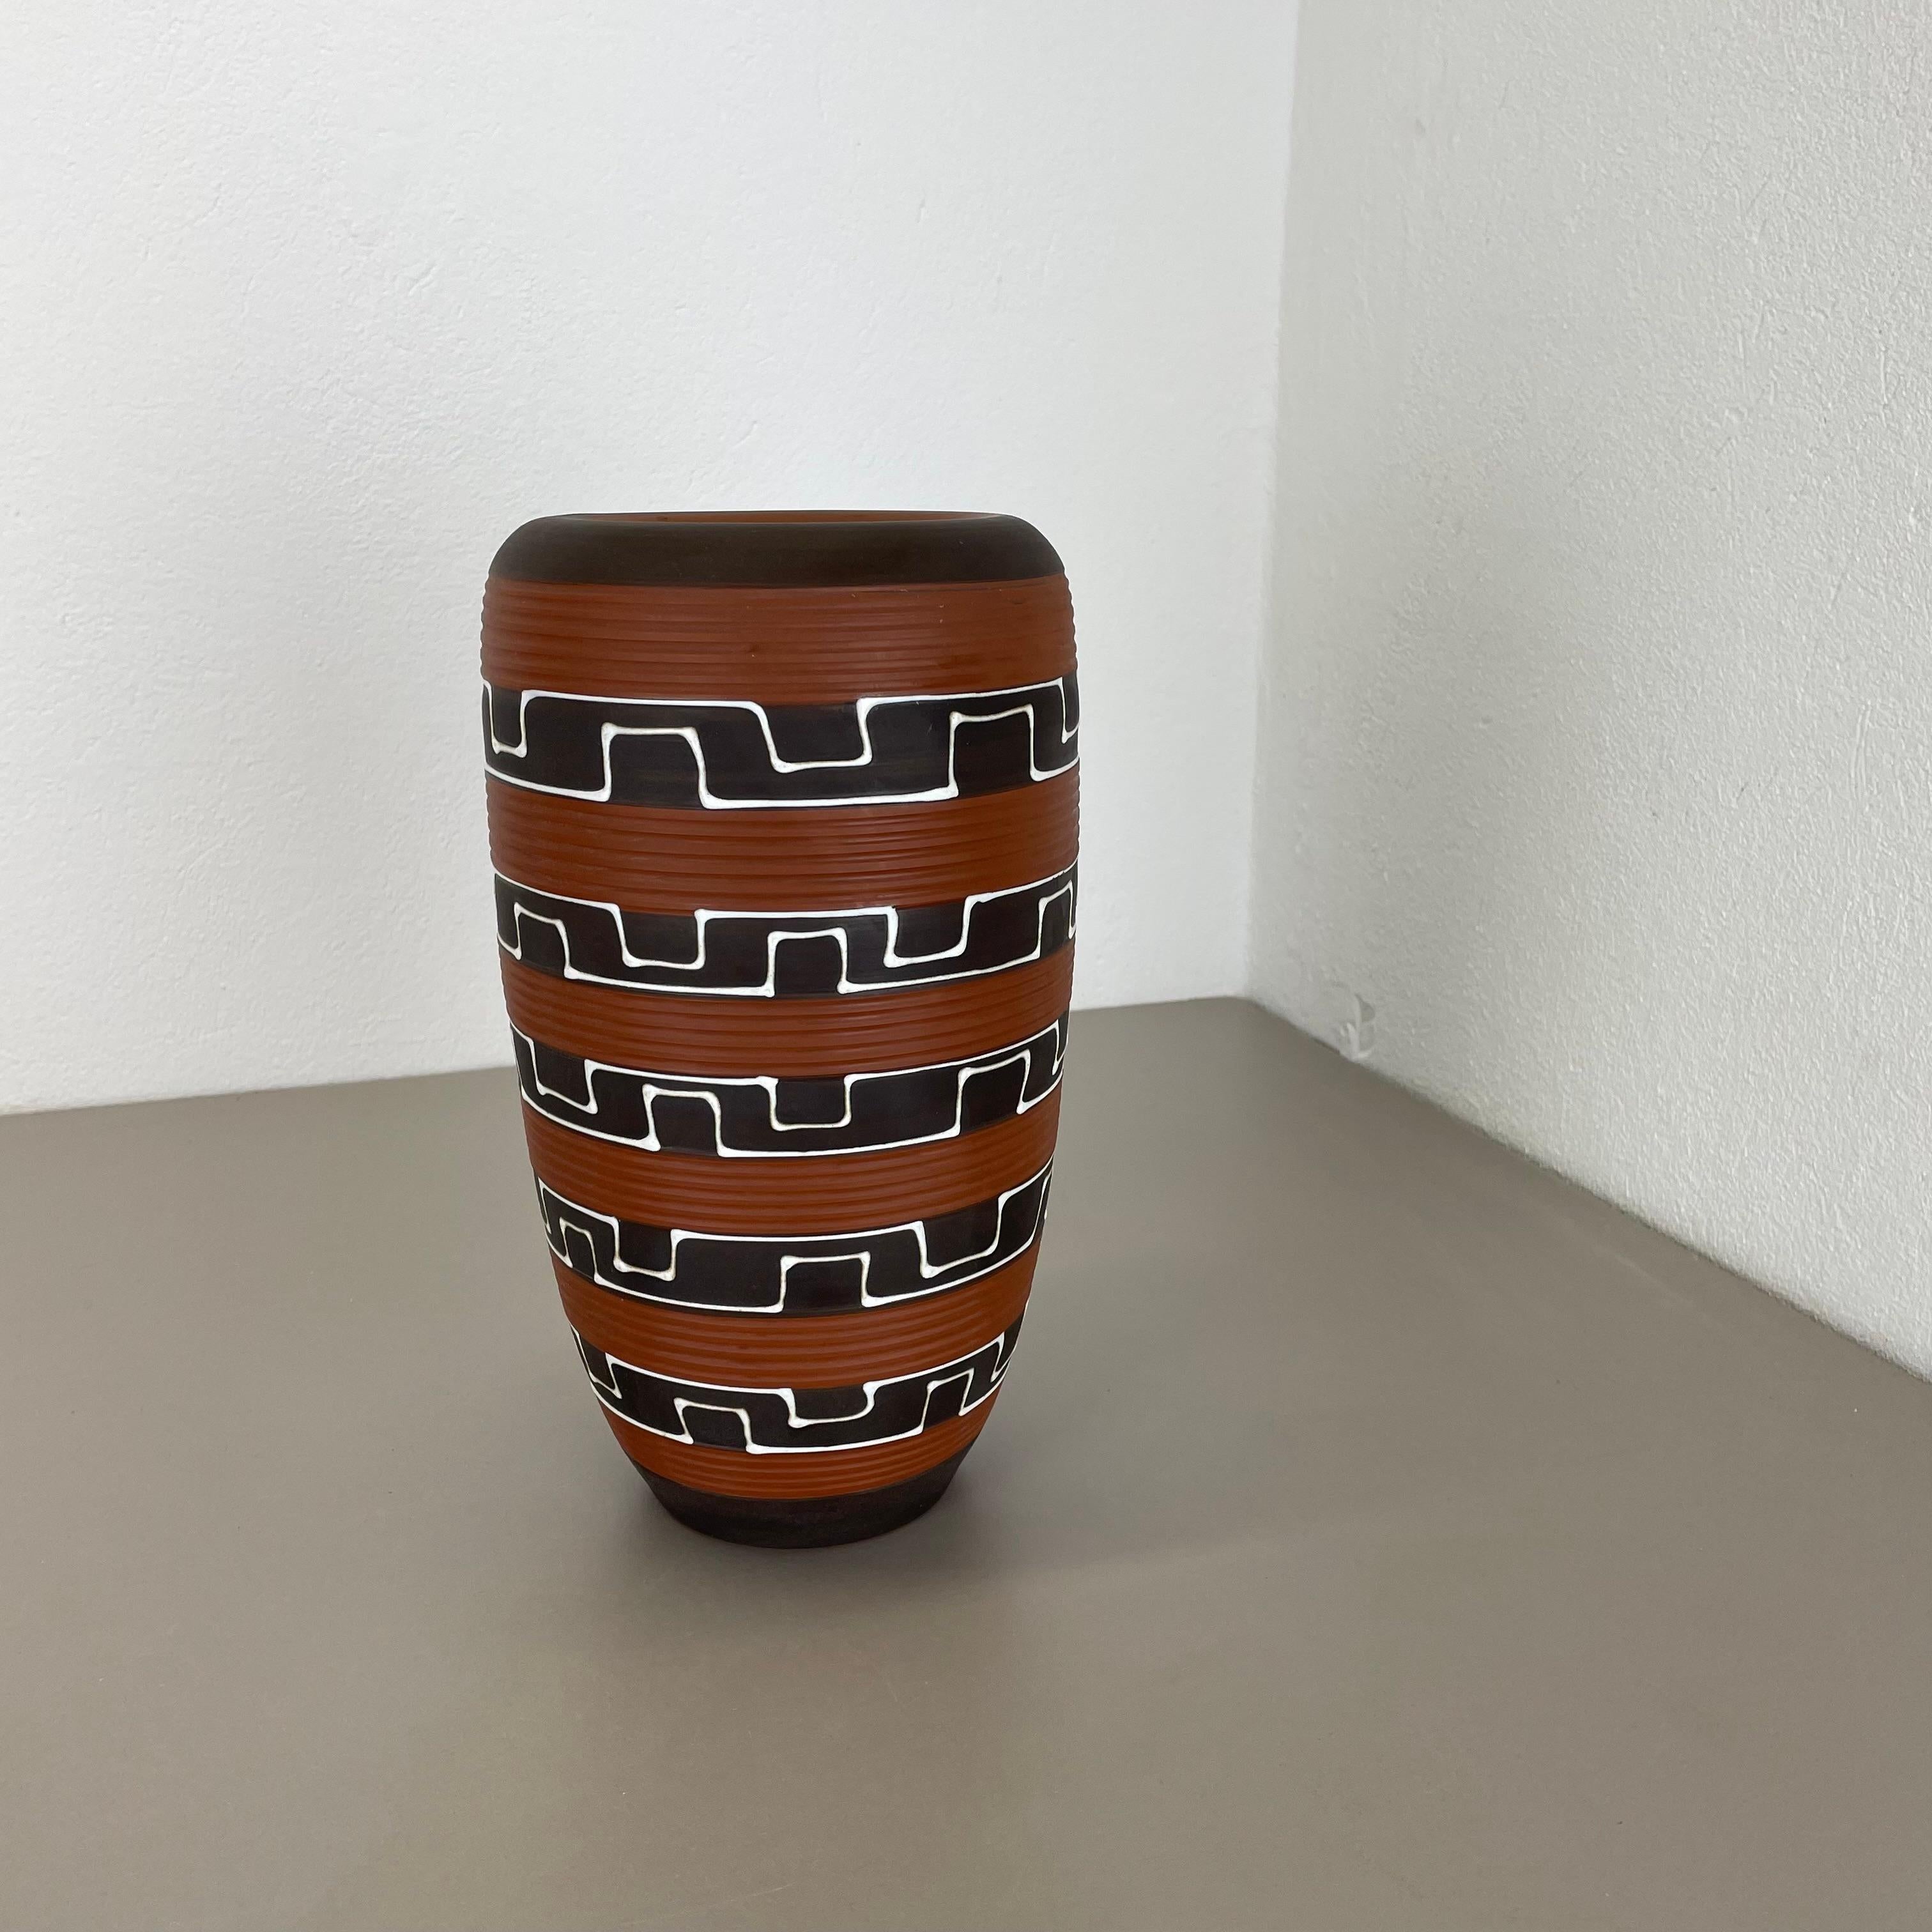 Article:

Pottery ceramic vase 


Producer:

ILKRA Ceramics, Germany


Decade:

1950s





Original vintage 1950s pottery ceramic vase made in Germany. High quality German production with a nice abstract brutalist surface glaze. The vase was